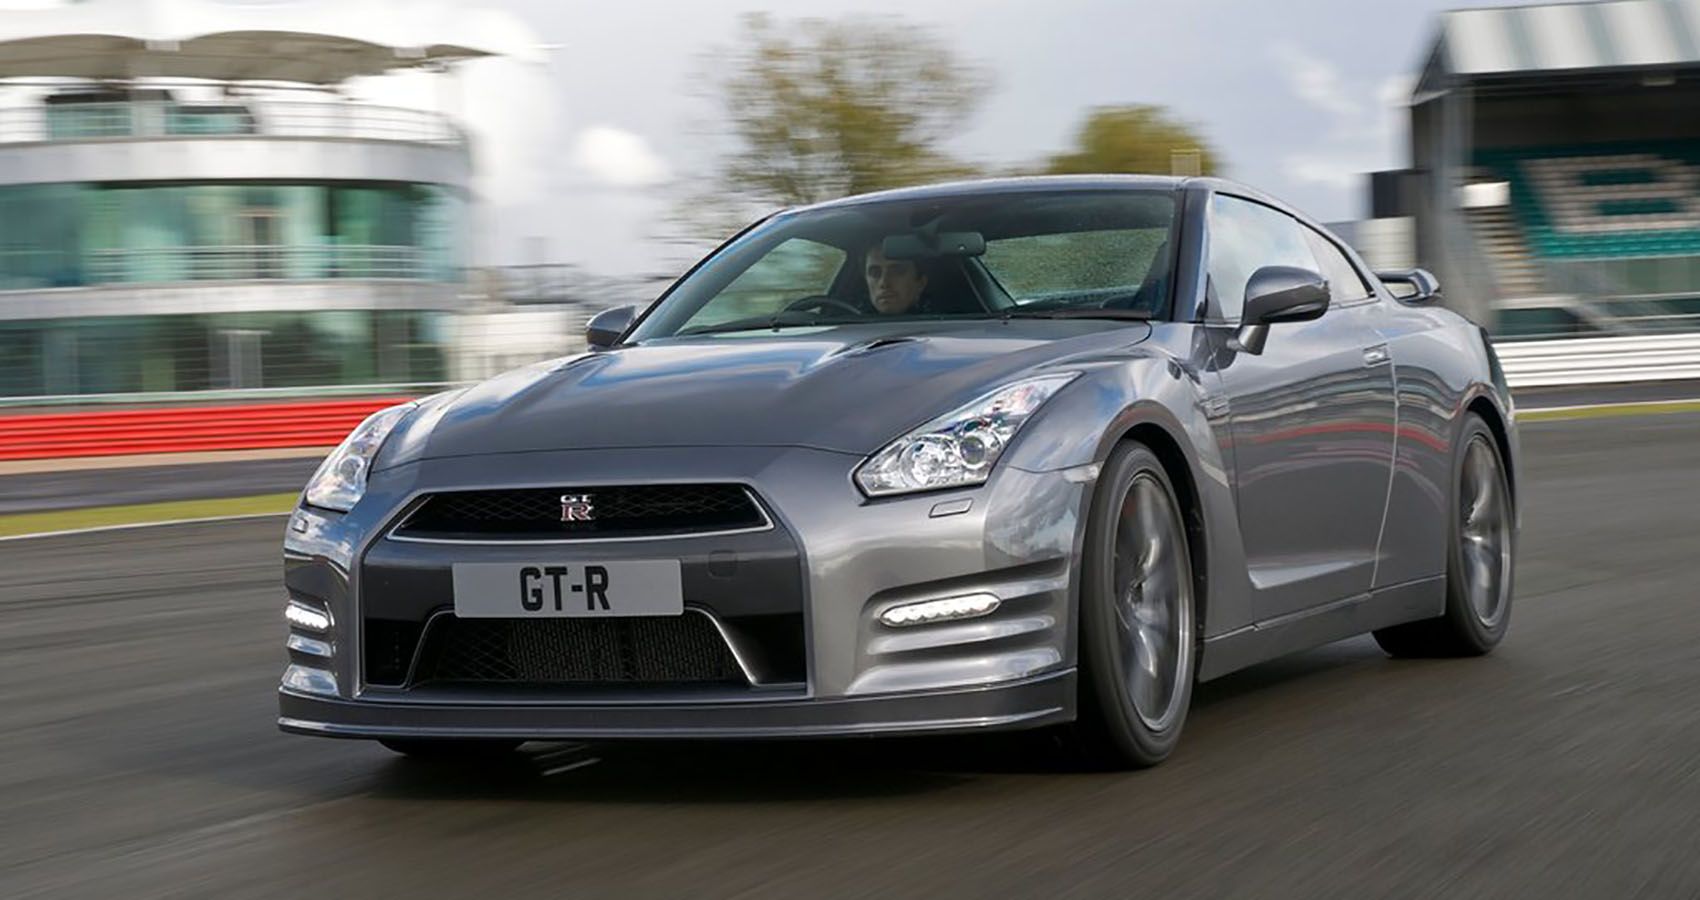 2012-r35-nissan-gt-r-exterior-front-angle